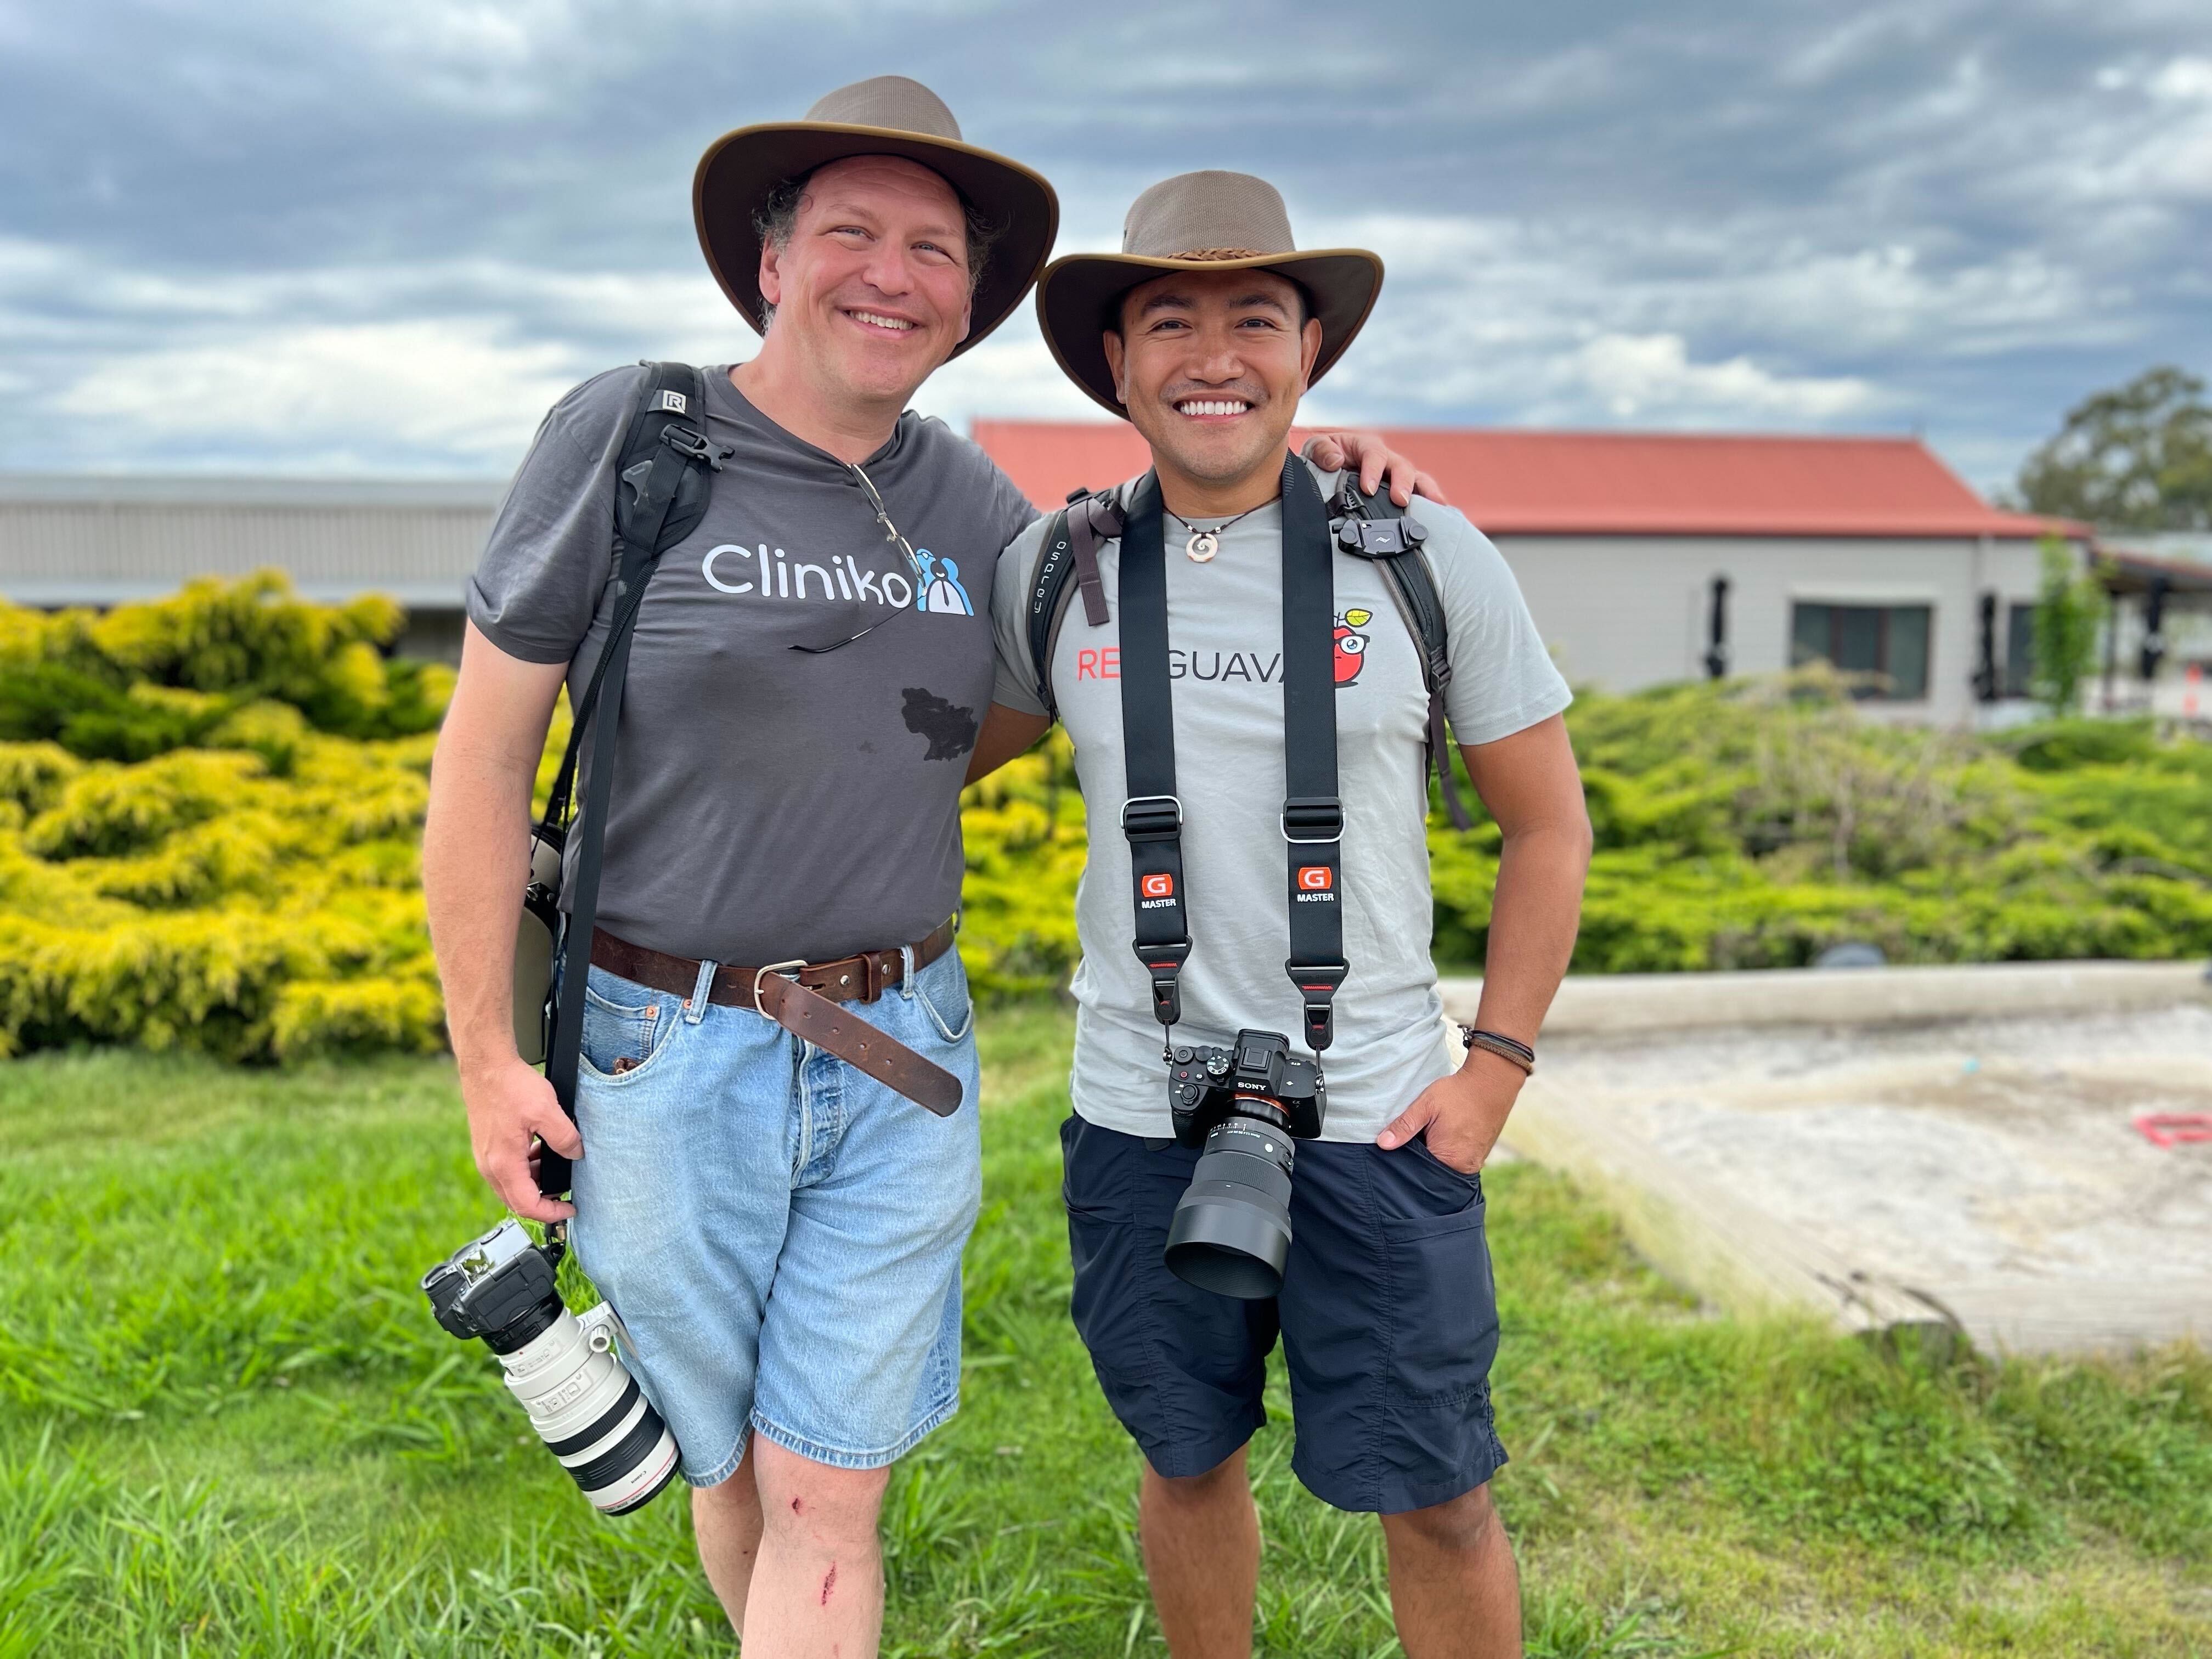 Bill and a colleague with matching hats and cameras